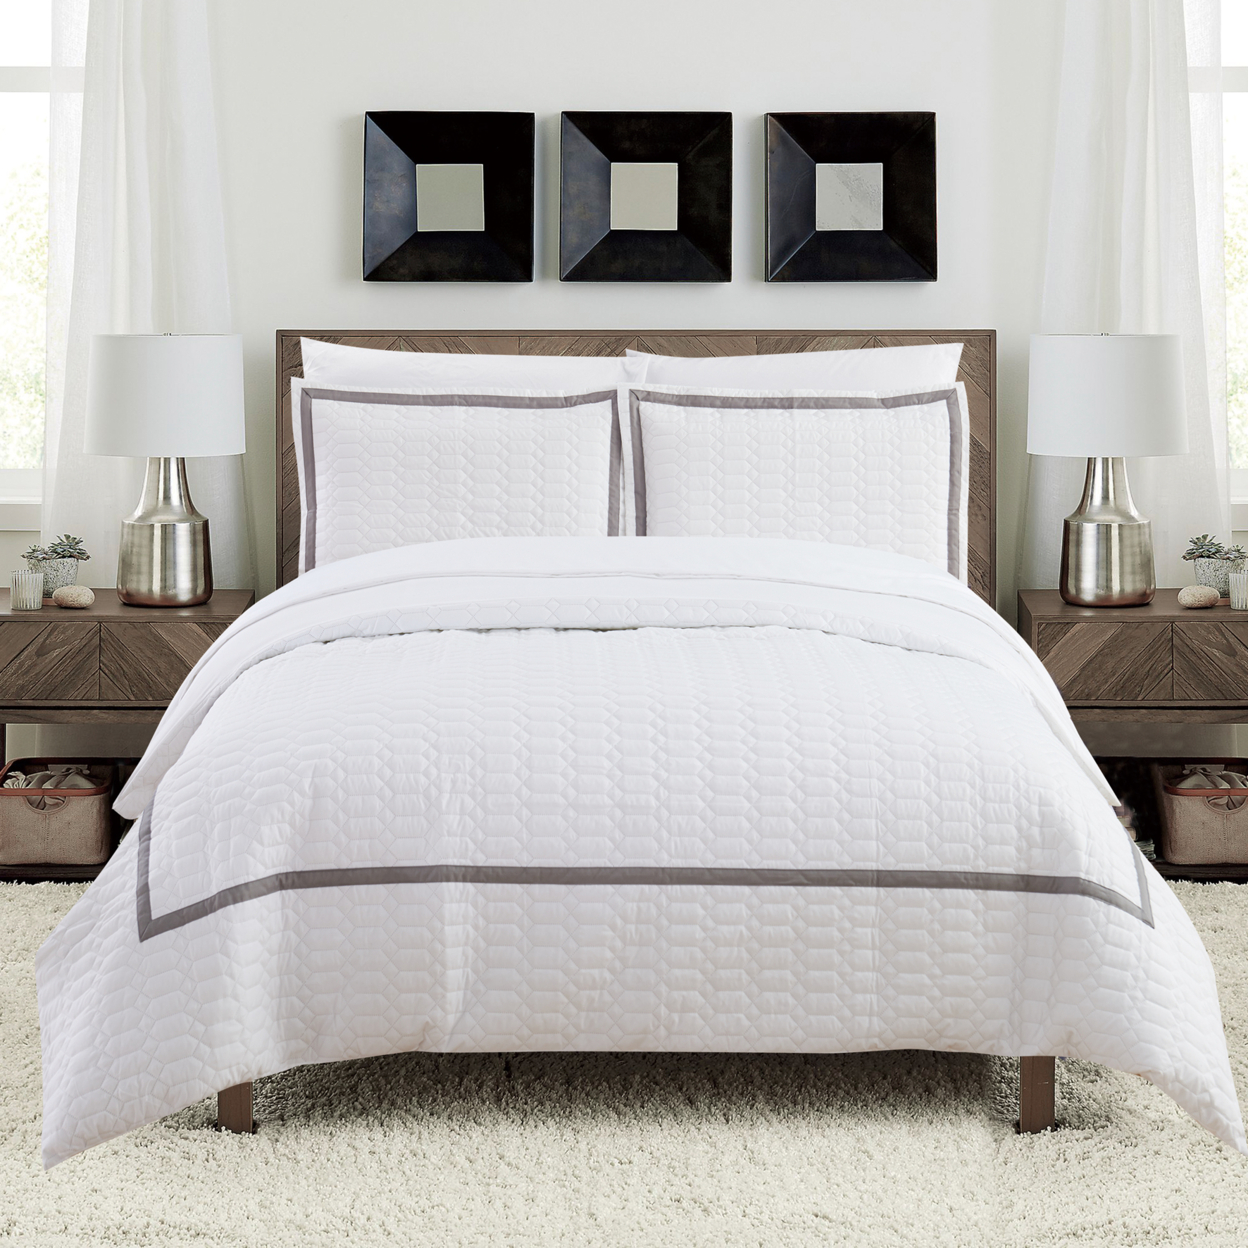 Dawn 2 Piece Duvet Cover Set Hotel Collection Two Tone Banded Print Zipper Closure - White, Queen